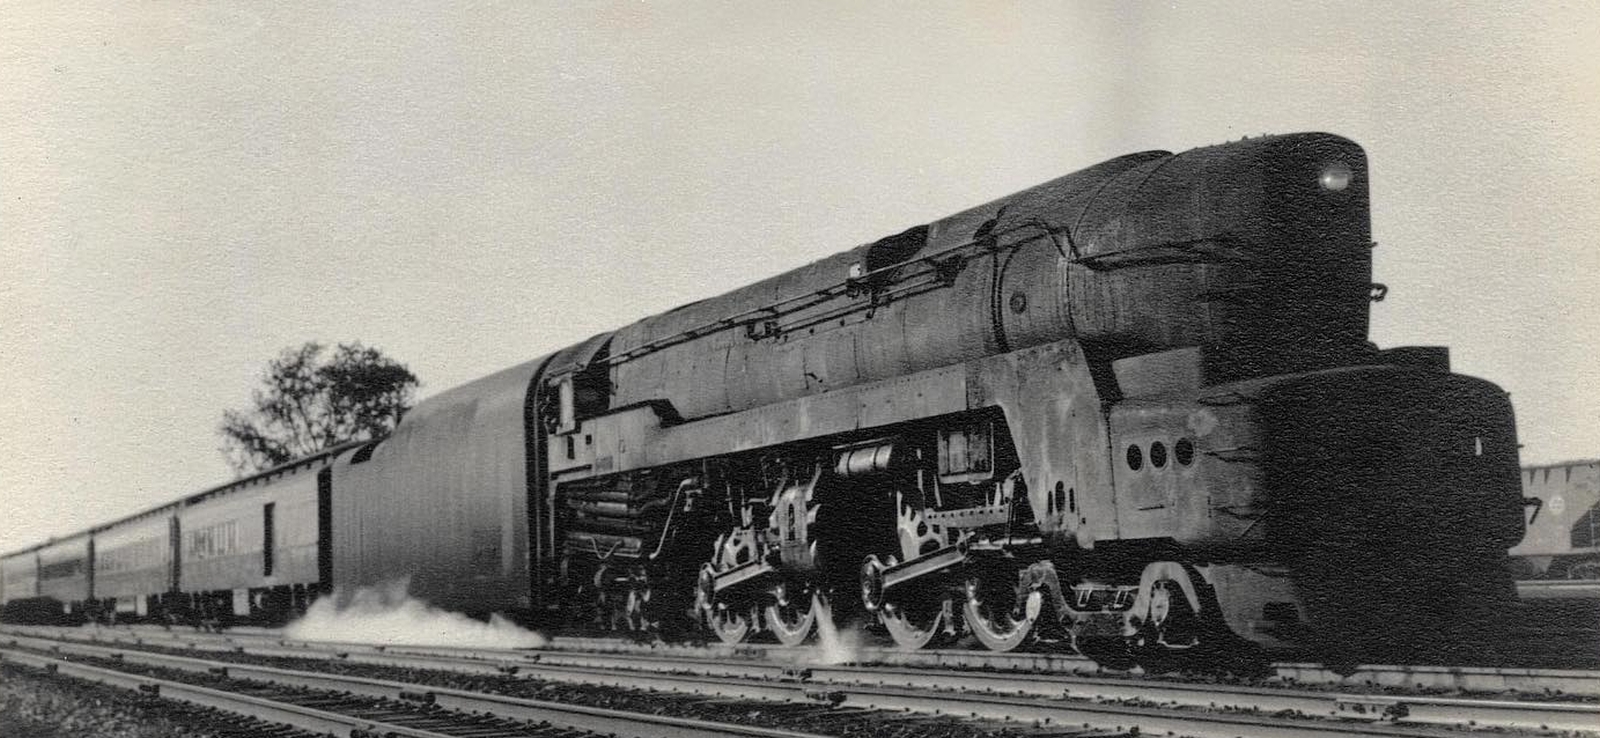 No. 5507 in December 1945 with a passenger train exiting Chicago